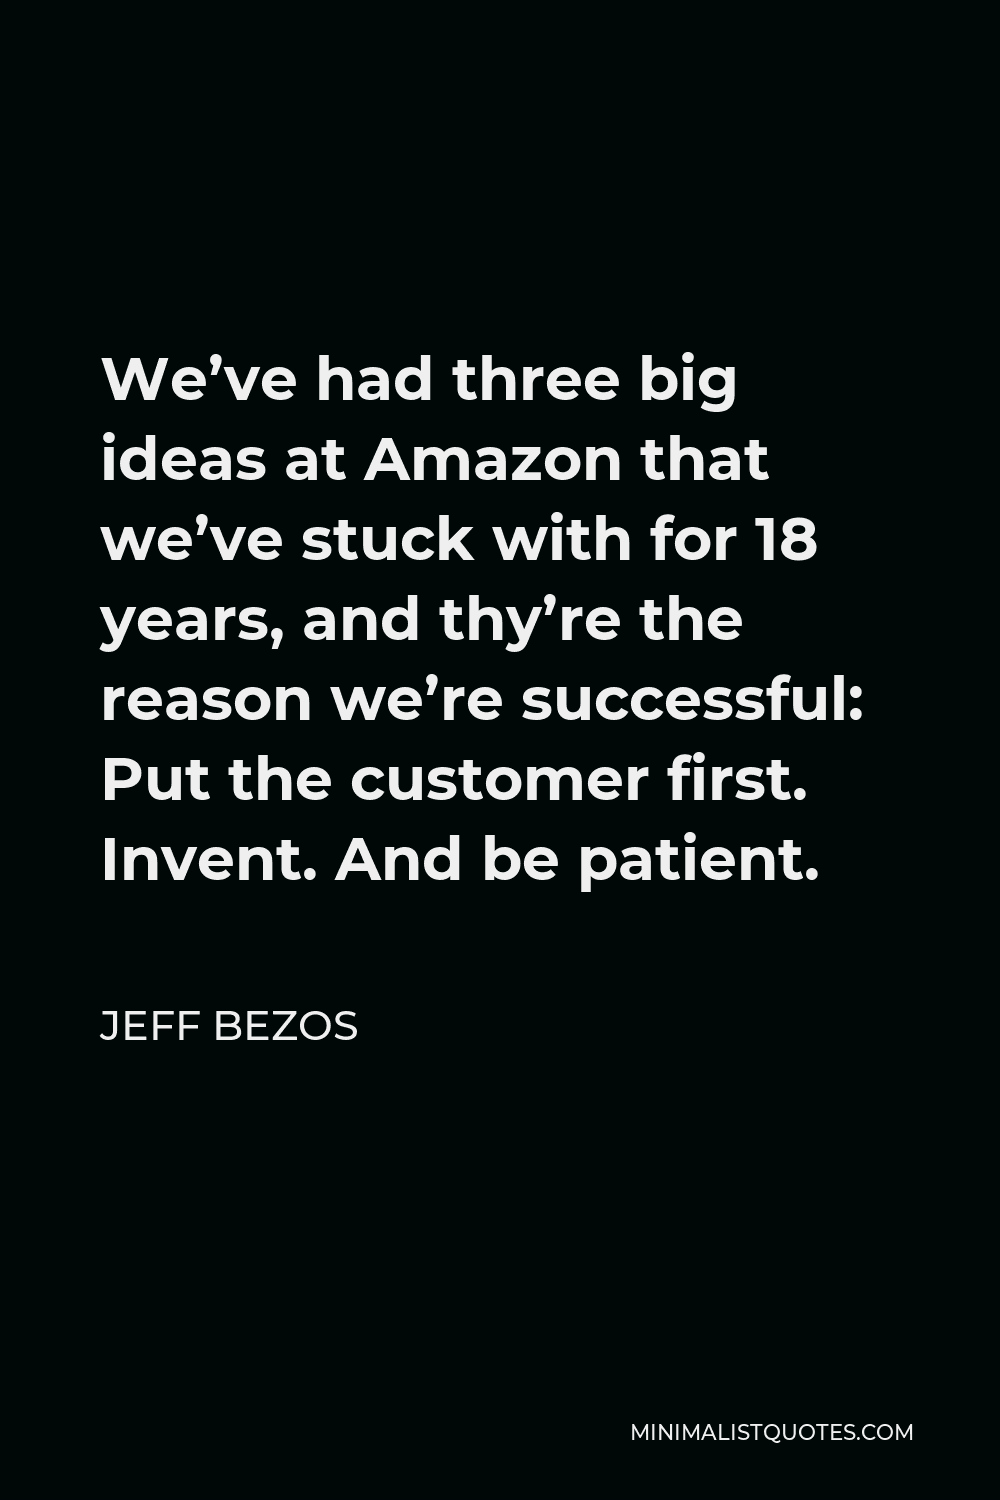 Jeff Bezos Quote - We’ve had three big ideas at Amazon that we’ve stuck with for 18 years, and thy’re the reason we’re successful: Put the customer first. Invent. And be patient.